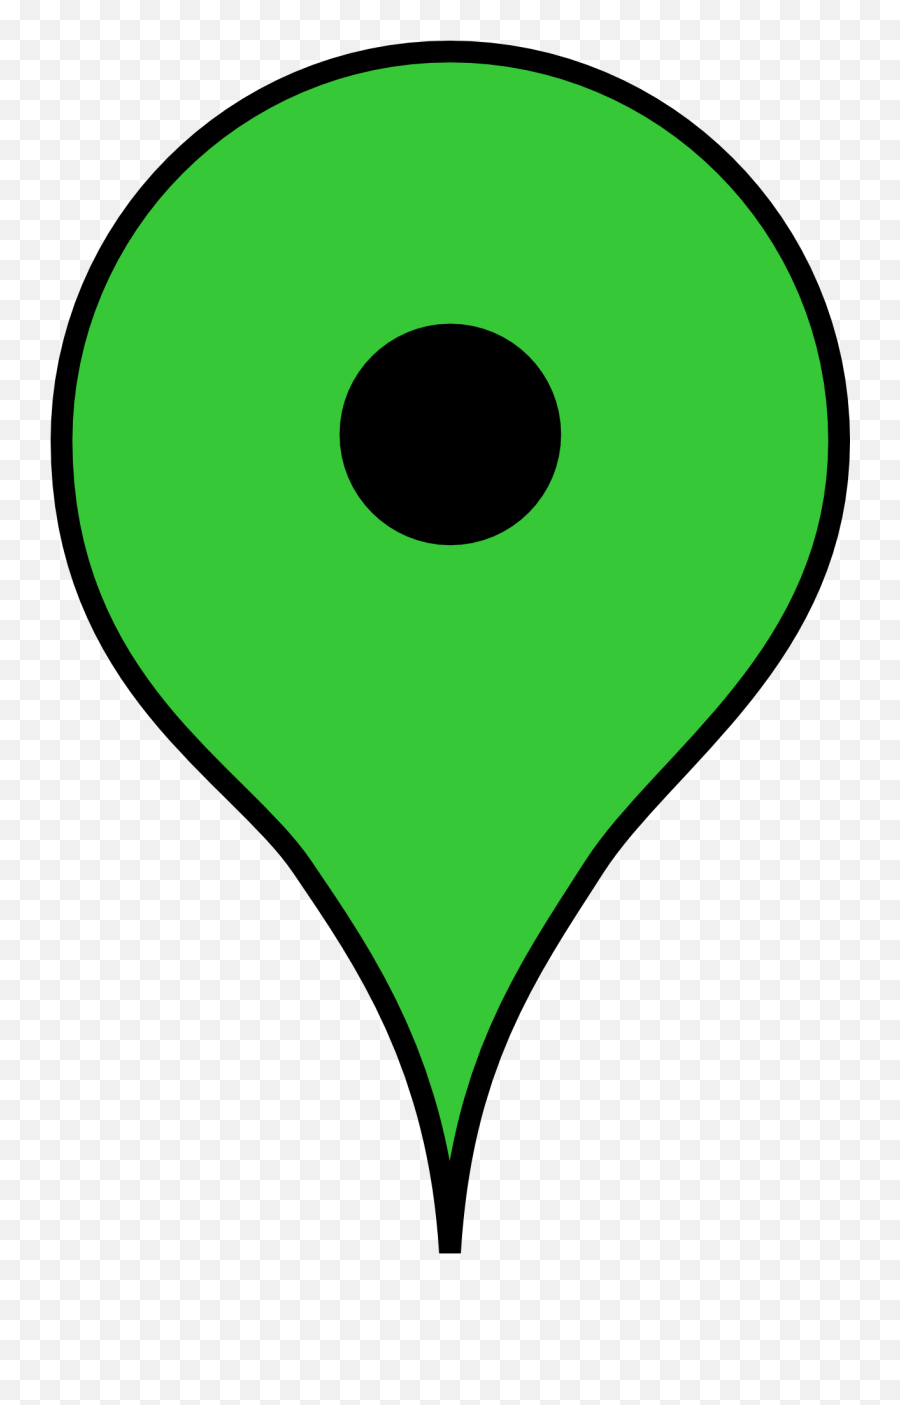 Clipart Of The Map Marker Free Image - Green Map Marker Emoji,Marker Clipart